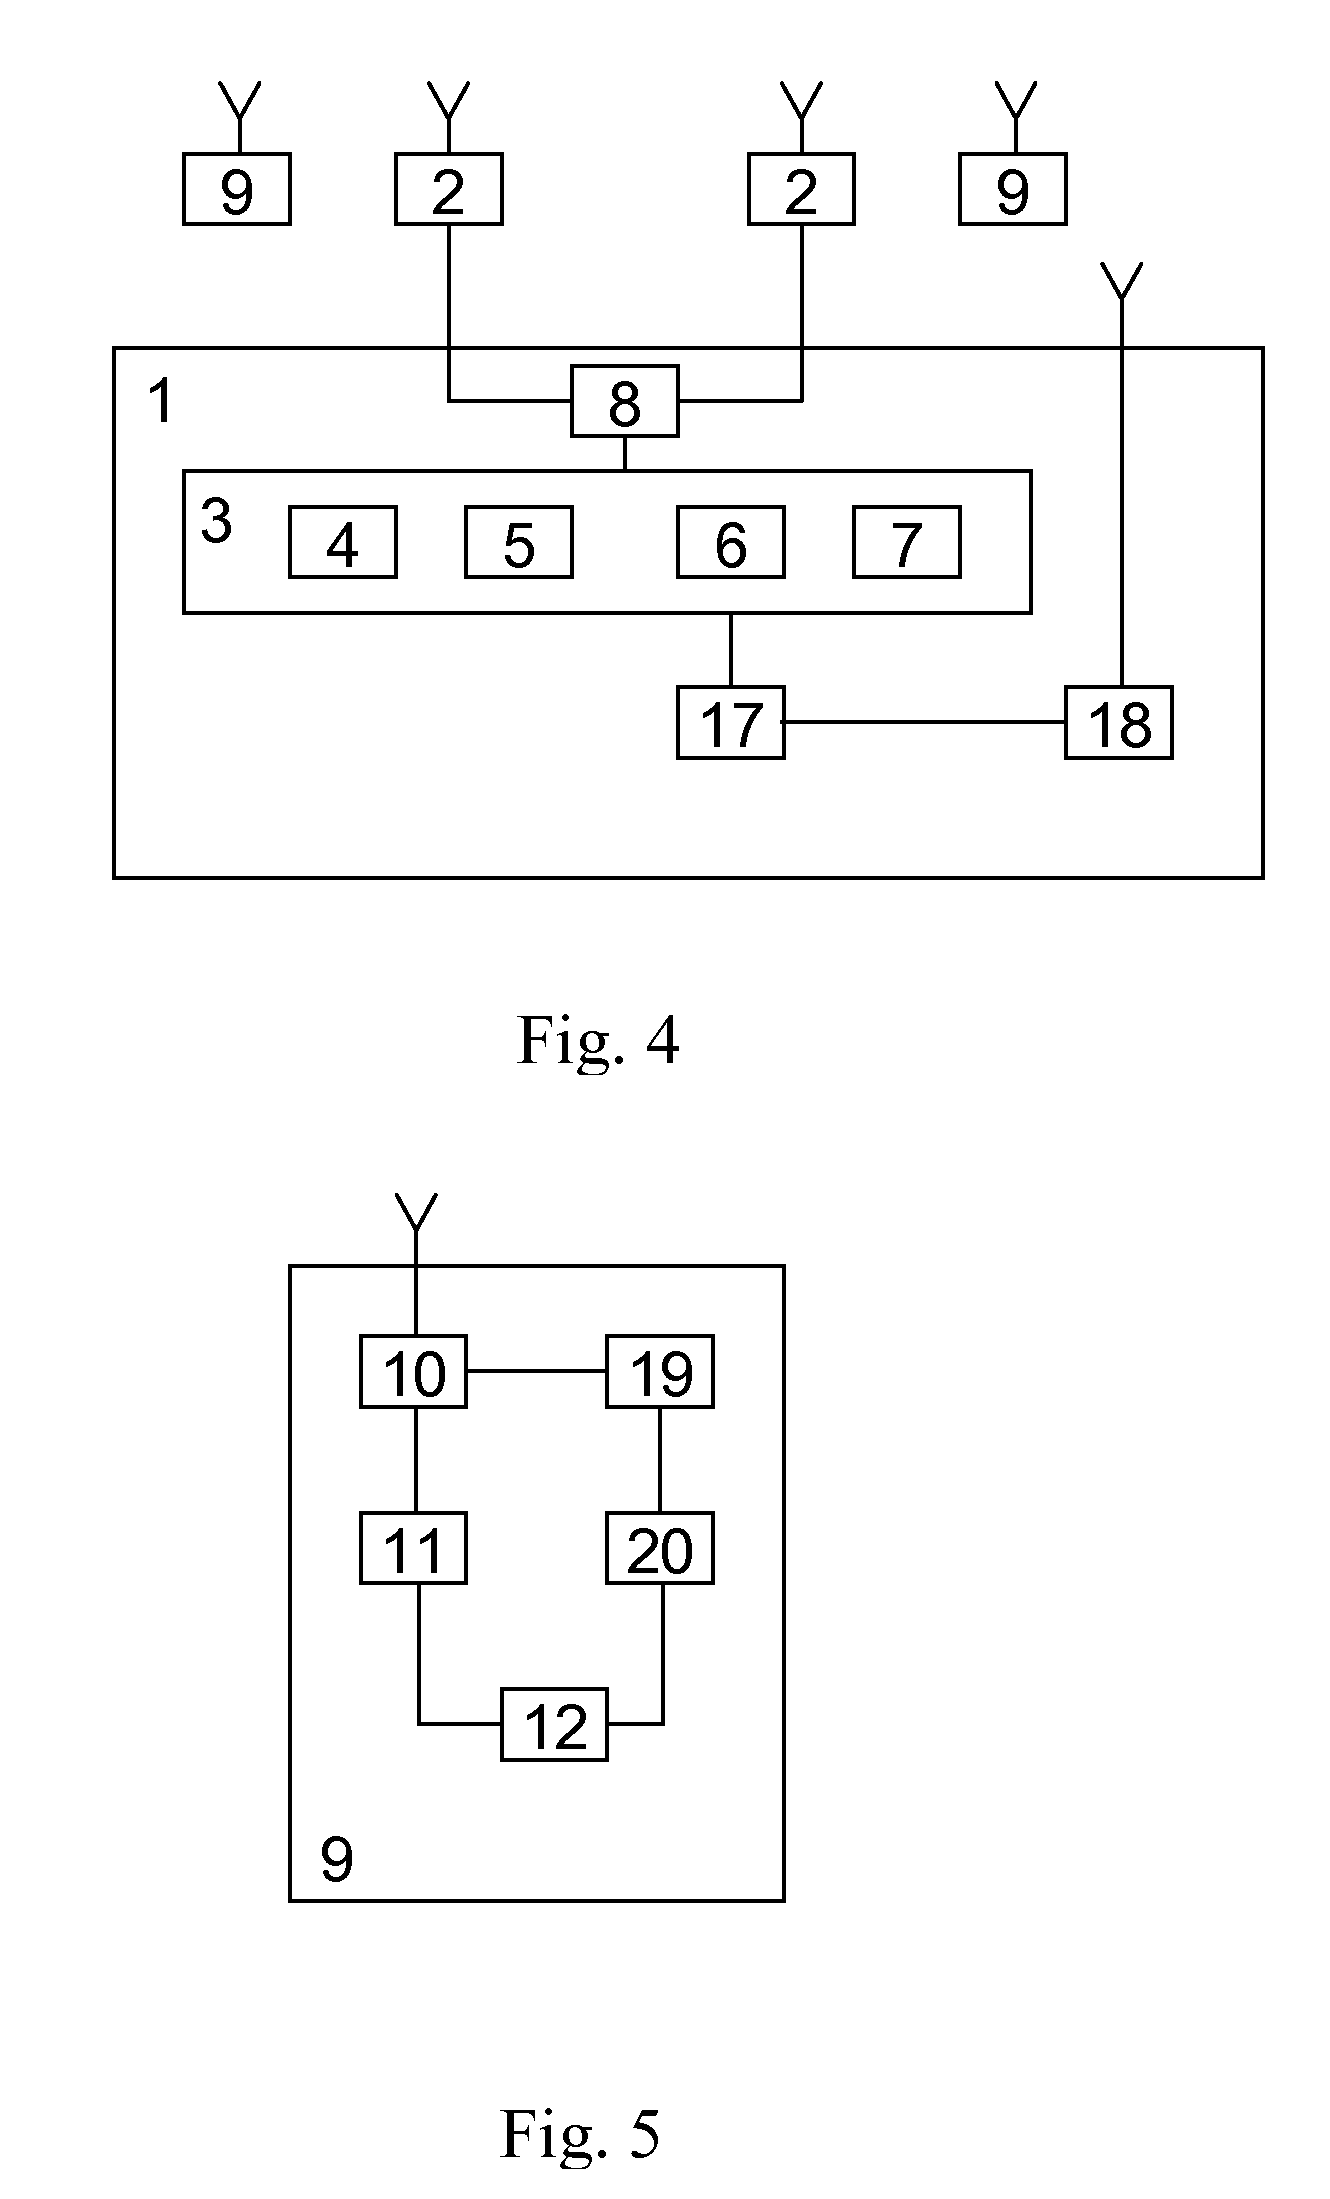 Subscriber calling method (variants) and a communications device system for carrying out said method